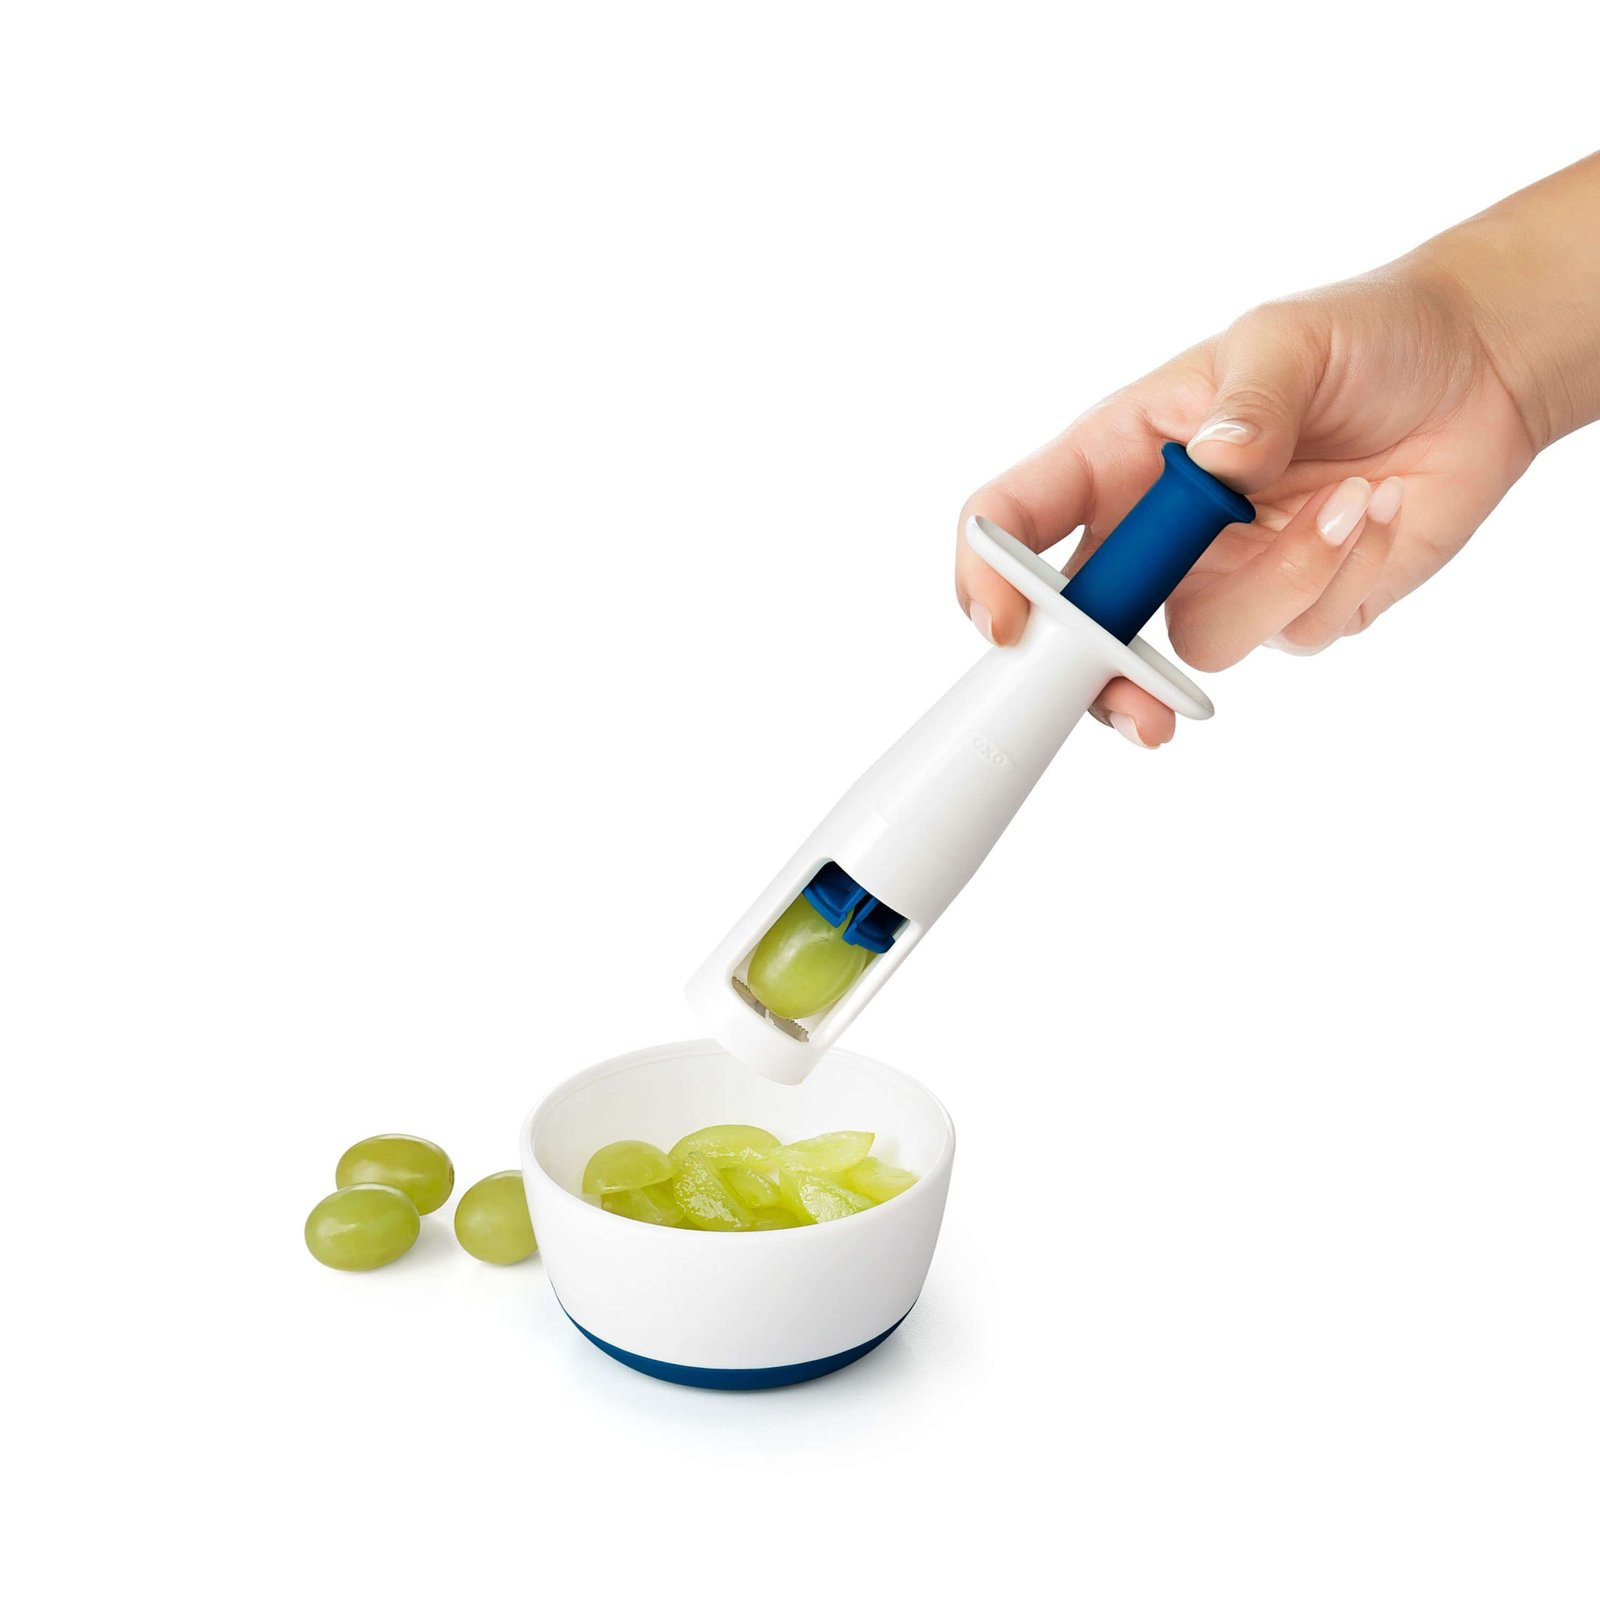 The OXO Tot Grape Cutter Review